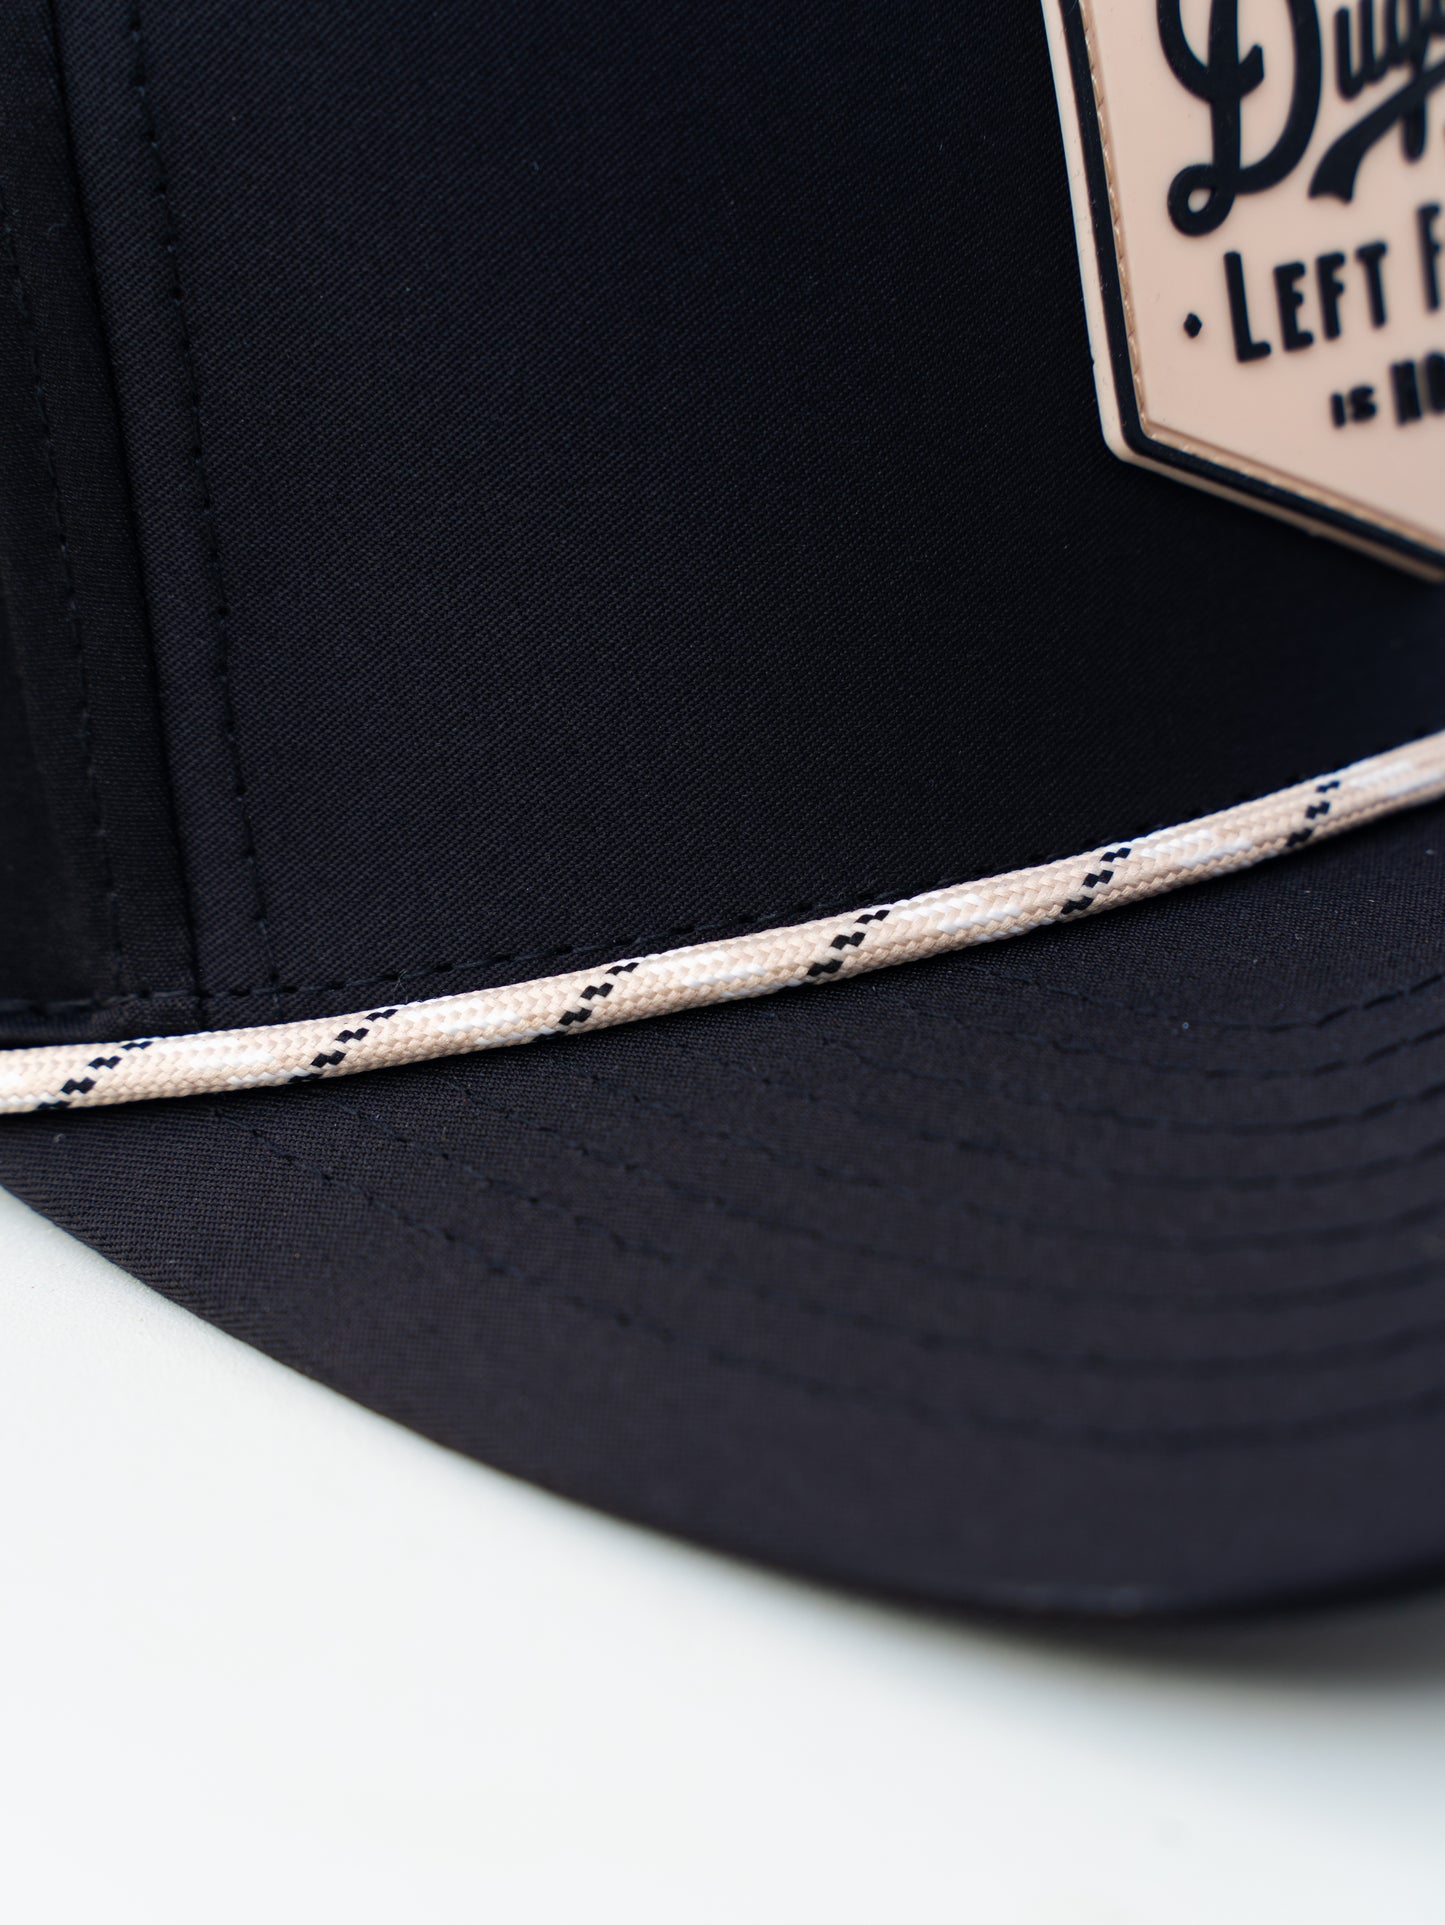 "Where Left Field Is Home" Rope Hat